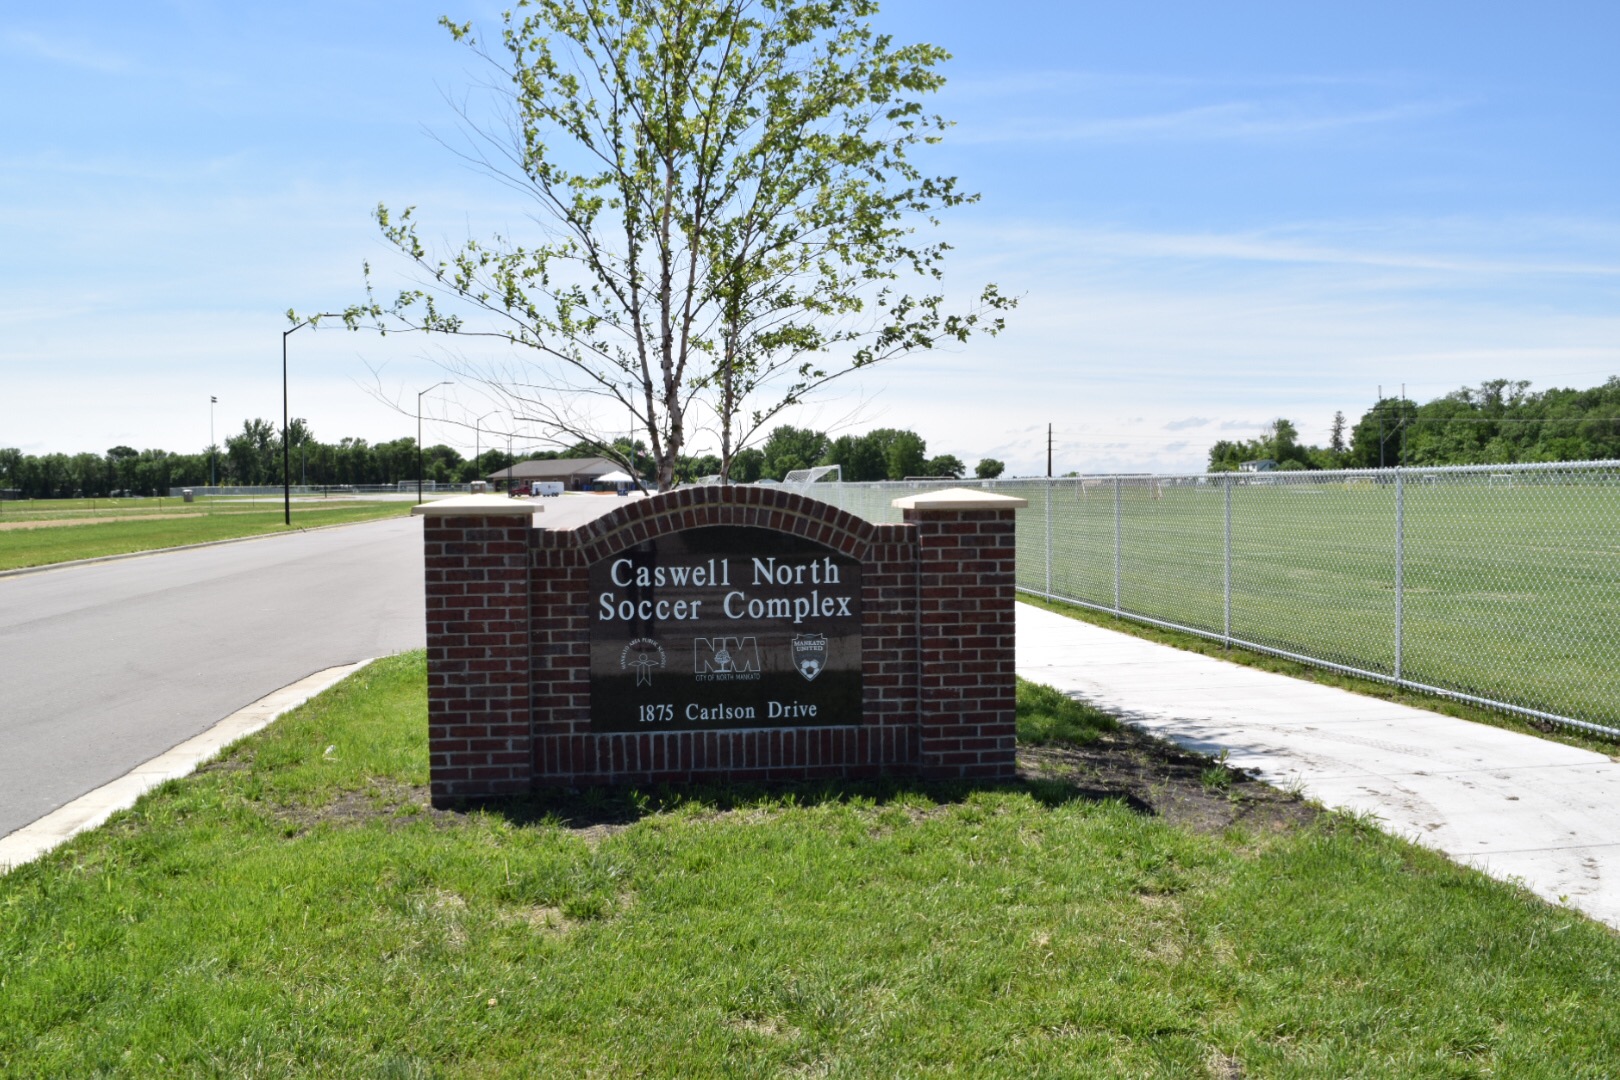 Caswell North Soccer